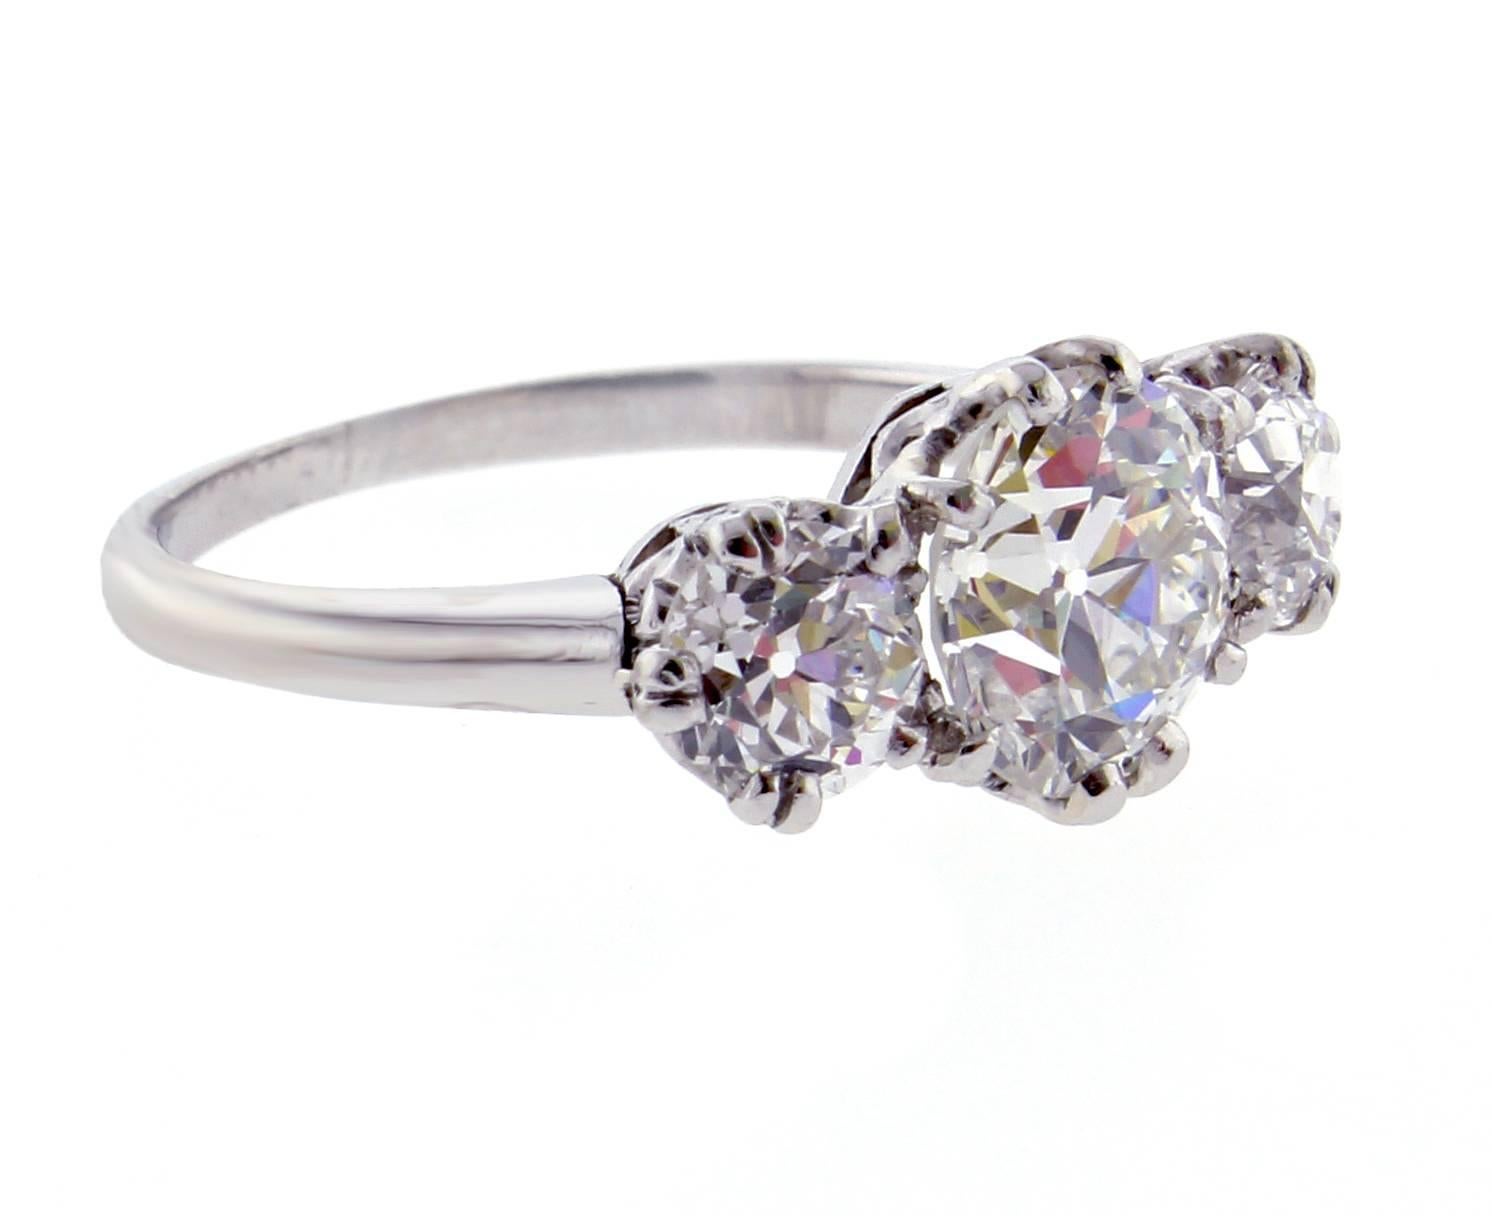 From the Belle Époque area this exception antique  platinum diamond ring. The ring feature a center old European cut diamond weighing 1.49 carats. G.I.A report # 1192424524 states the diamond is  G color and VS2 clarity. The two matching side